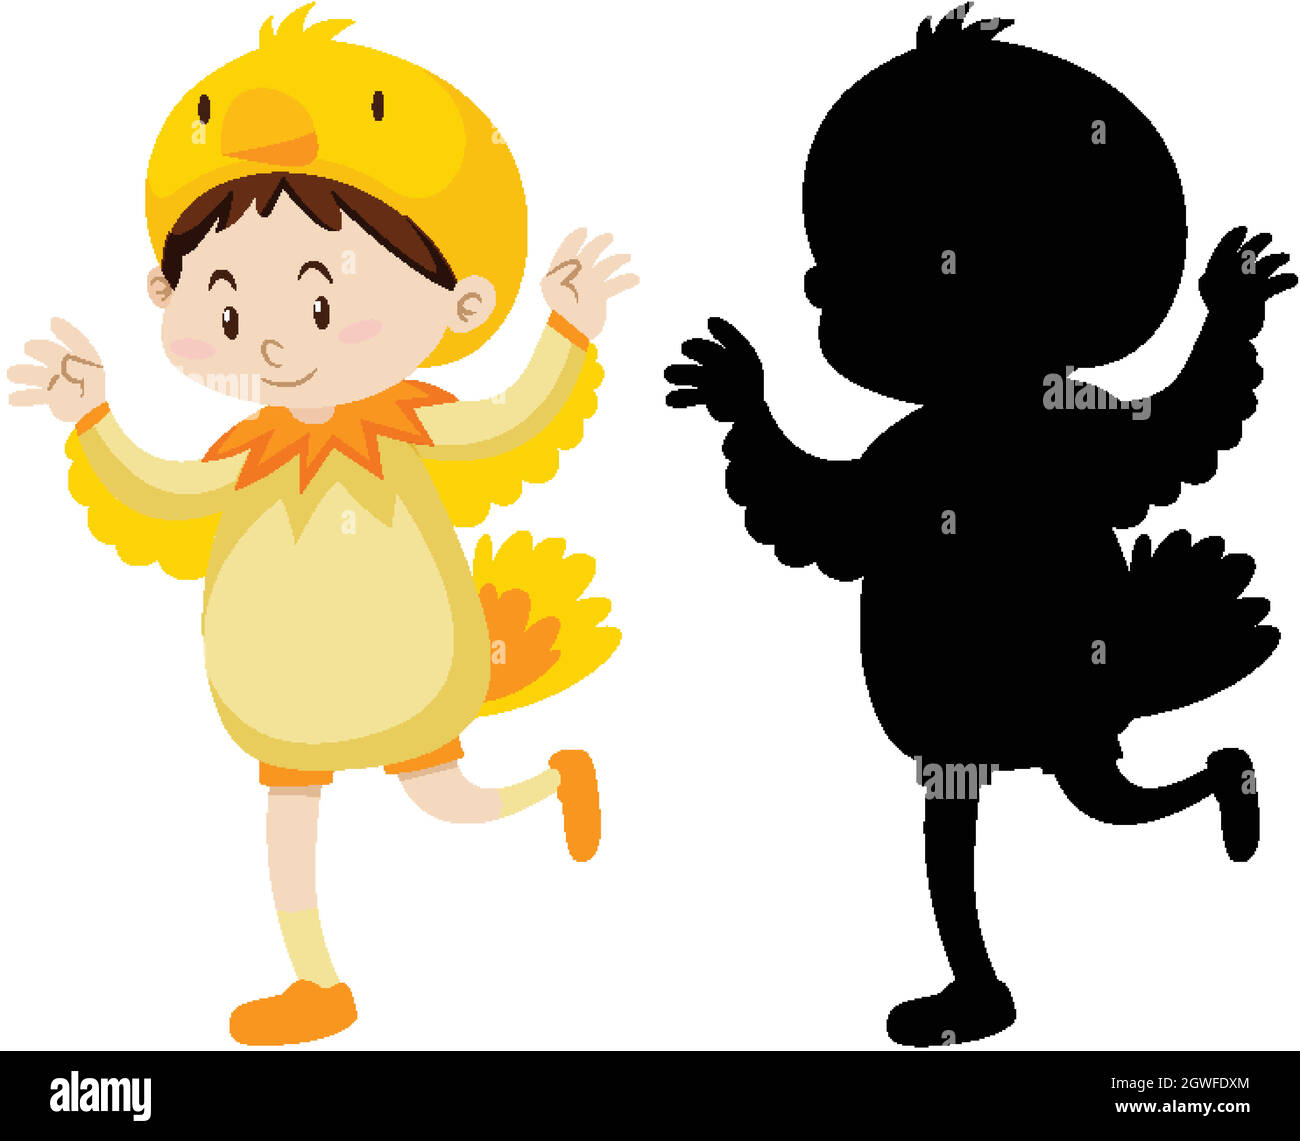 Kid wearing chicken costume with its silhouette Stock Vector